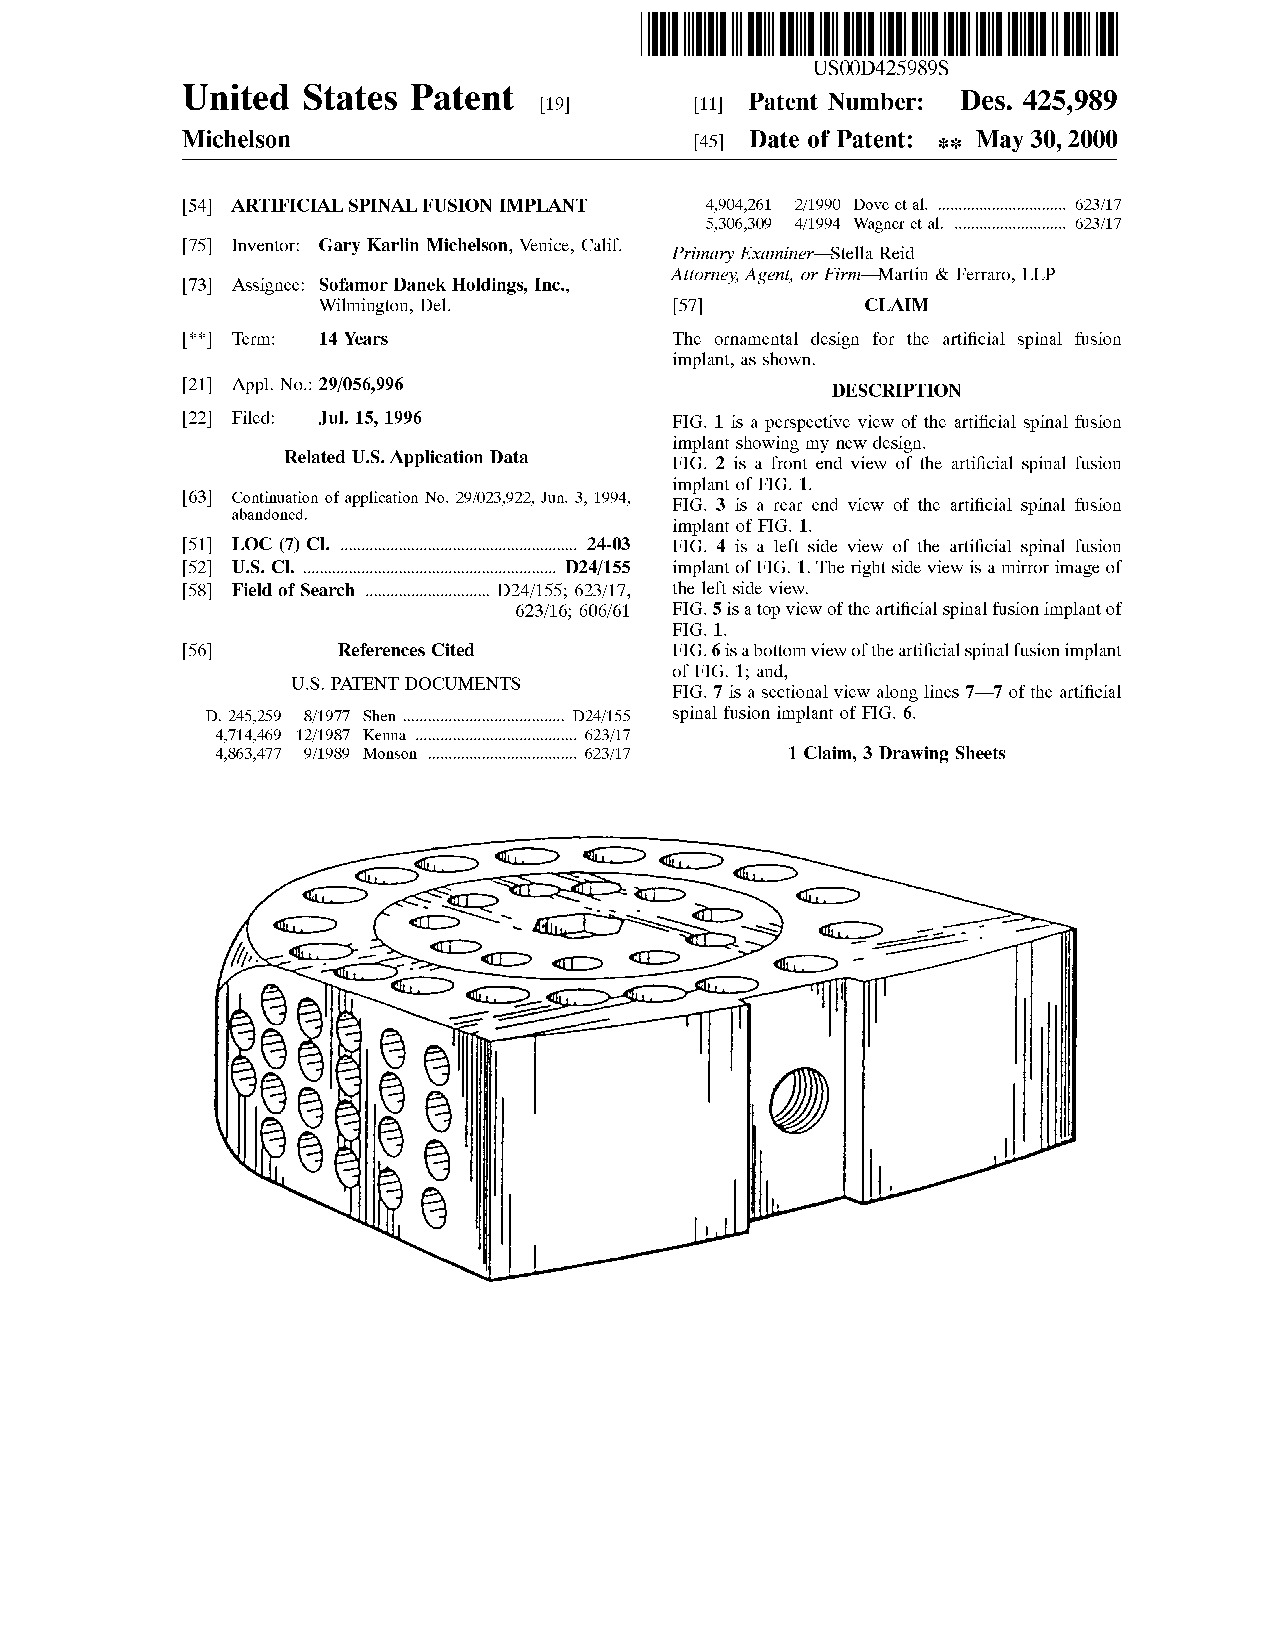 Artificial spinal fusion implant - Patent D425,989